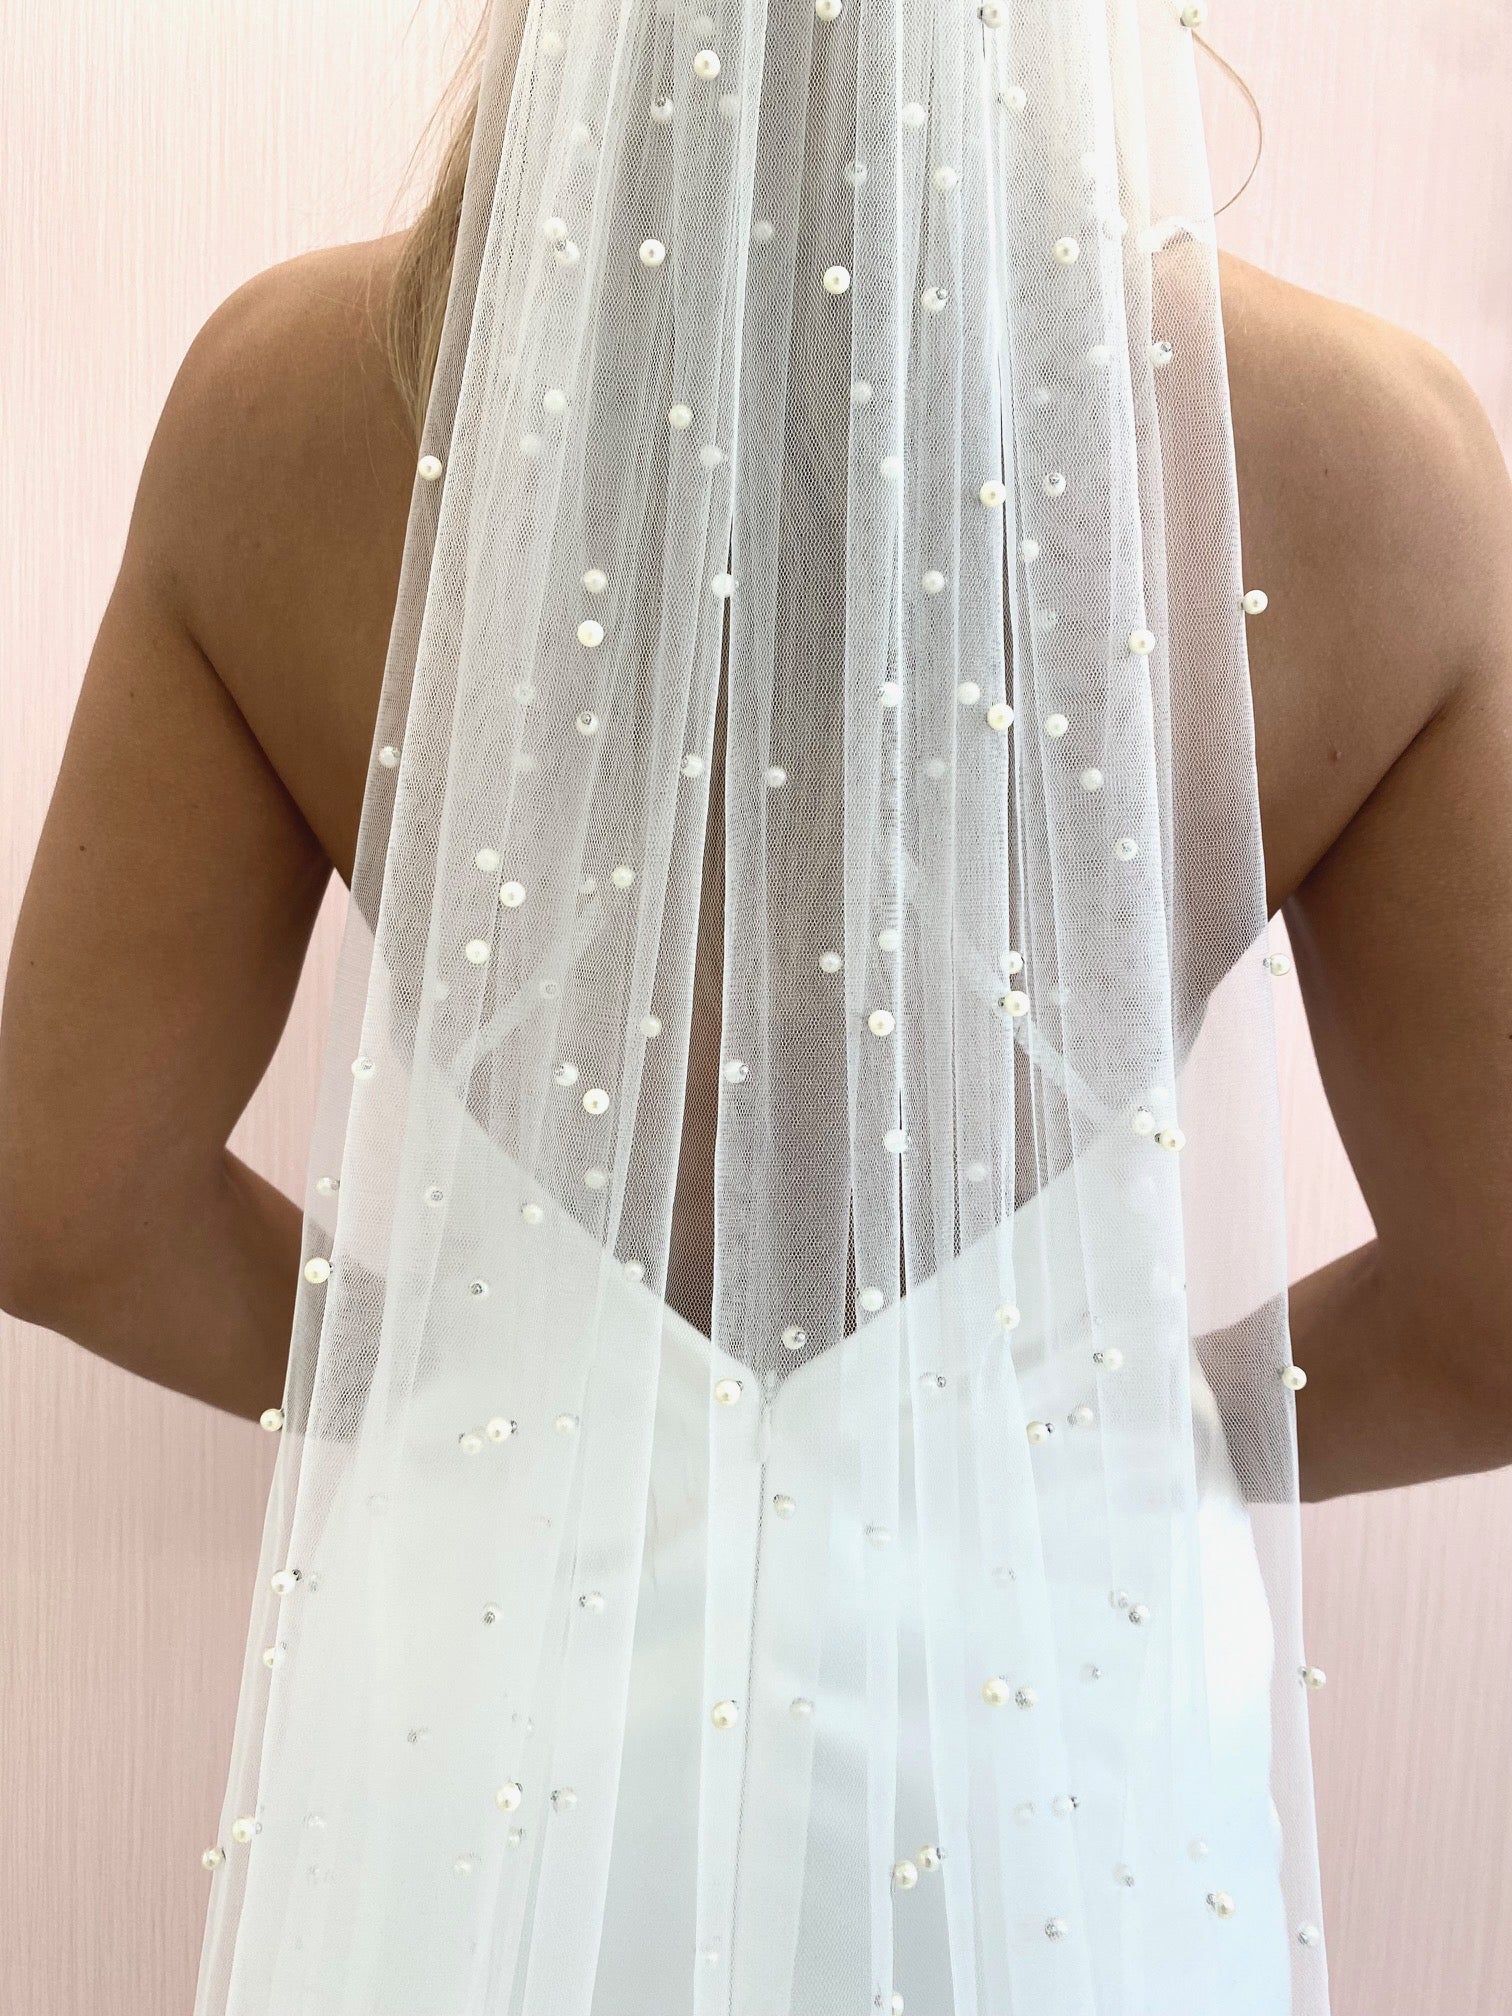 Ombre Fading Pearl Wedding Veil, One Tiar Veil with Faded Pearls, Ombr –  Pet-Jos Bridal